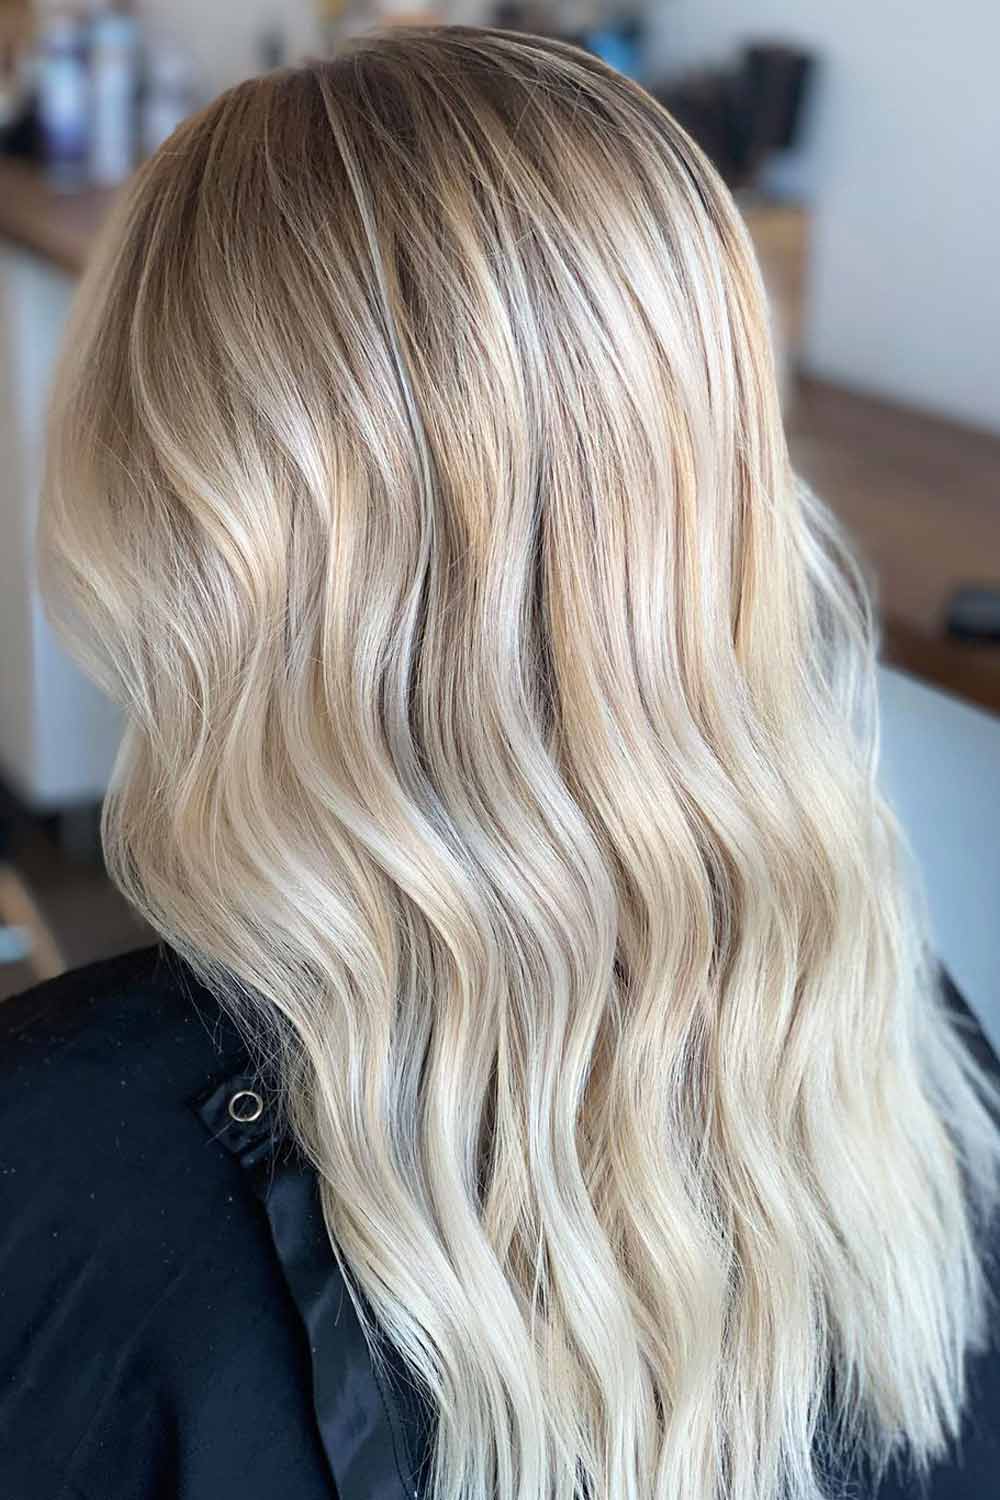 Buttery Blonde Hair #blondehair #blondehaircolor #blonde